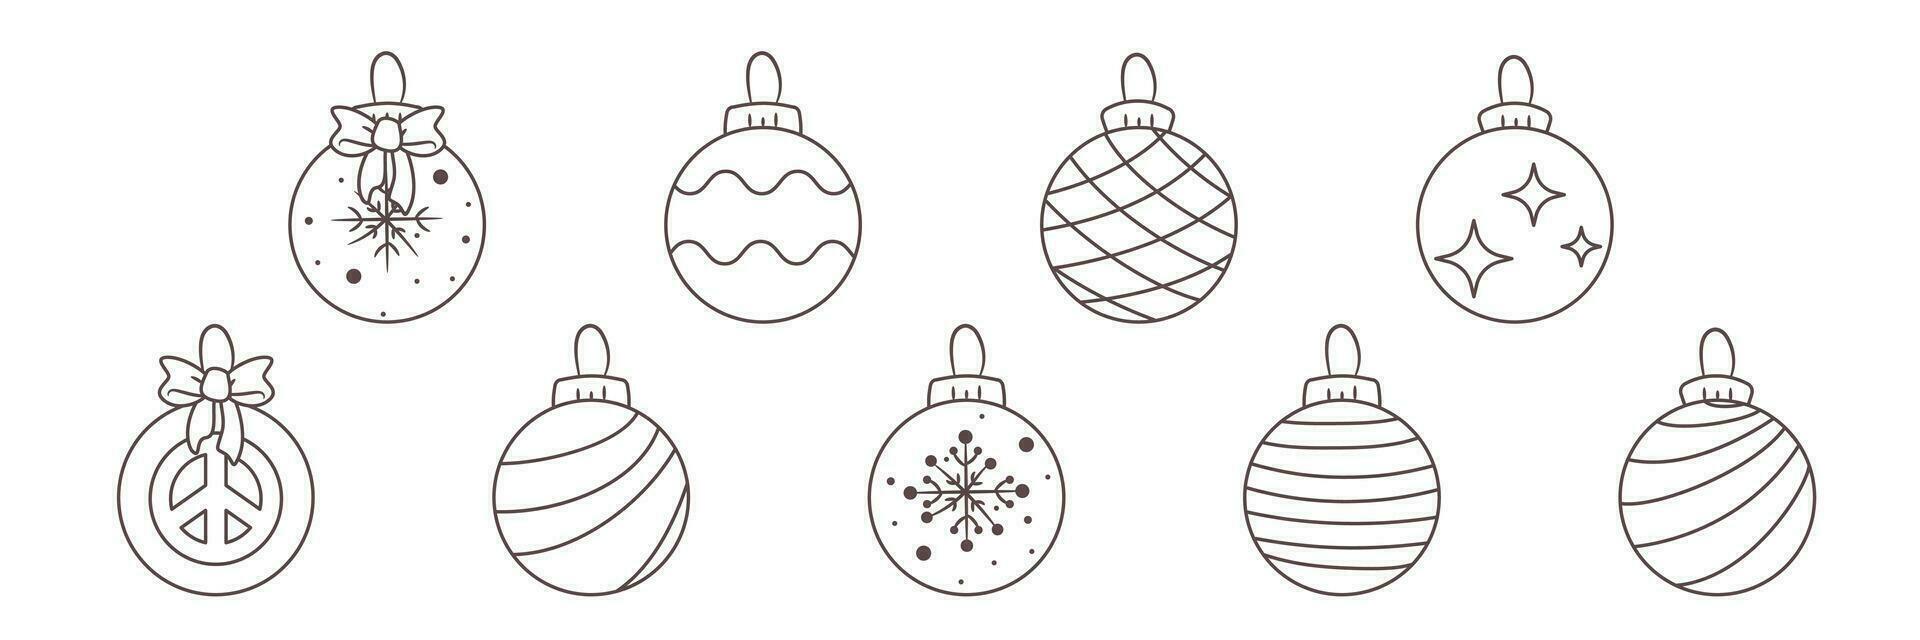 Vector Set of nine different Isolated Christmas ornaments, toys for xmas tree. Outline illustration for festive design